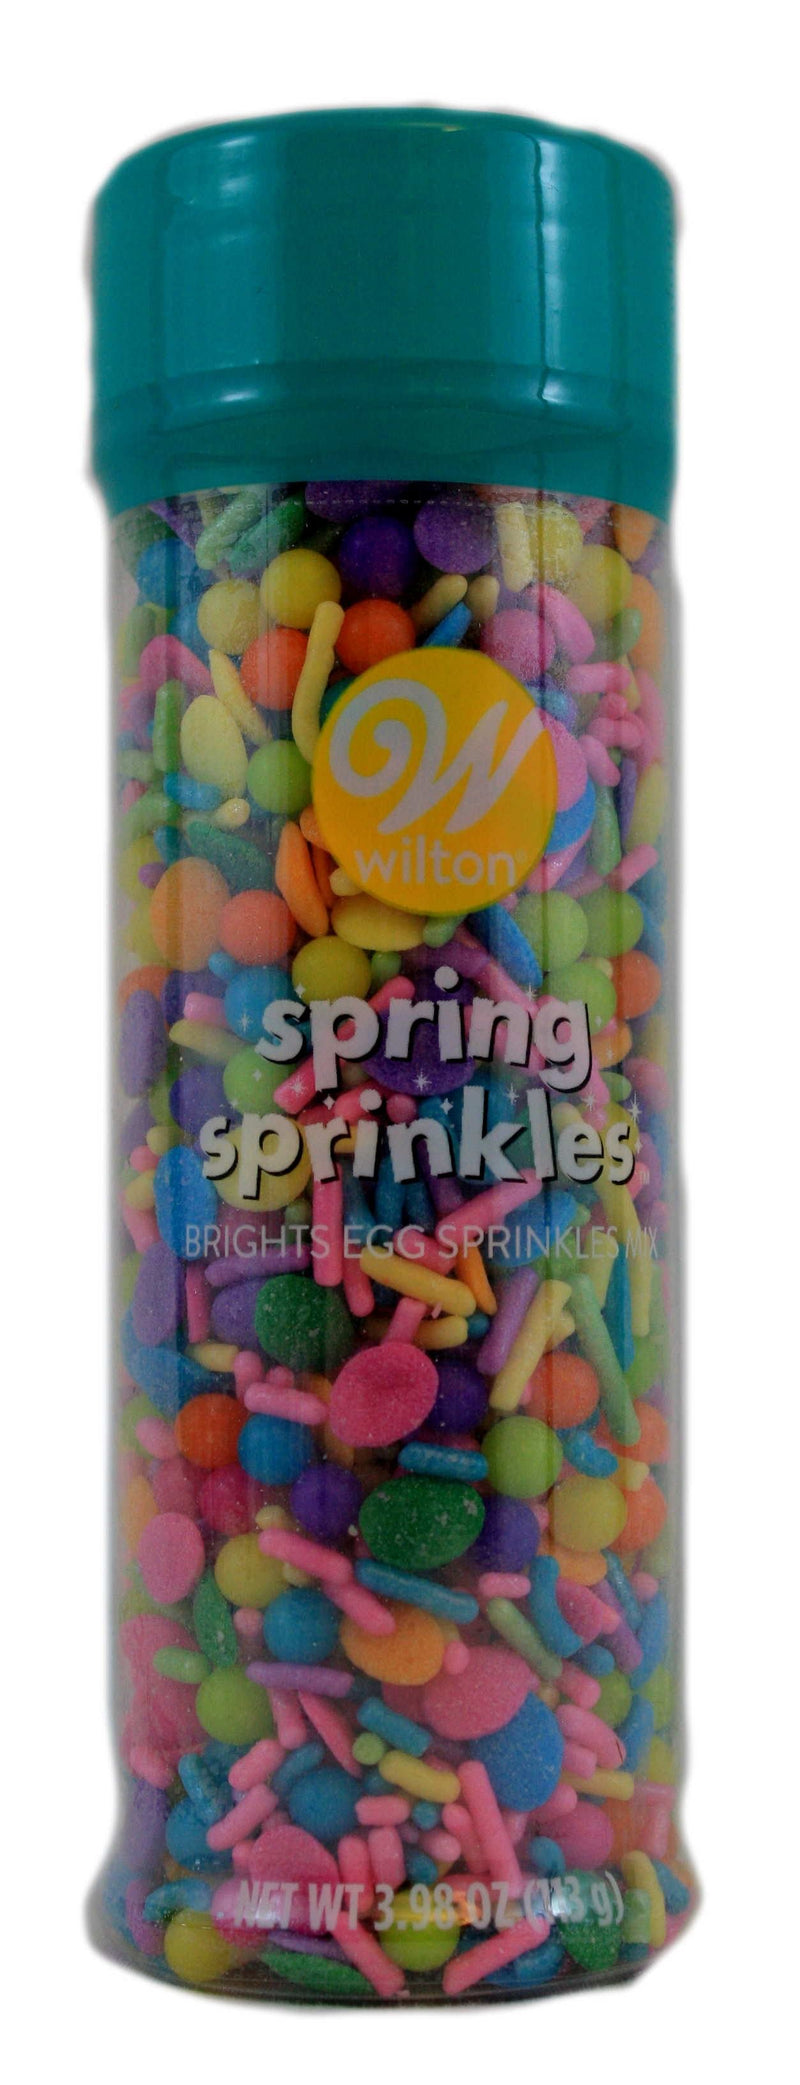 Wilton Brights Egg Sprinkle Mix - Shelburne Country Store